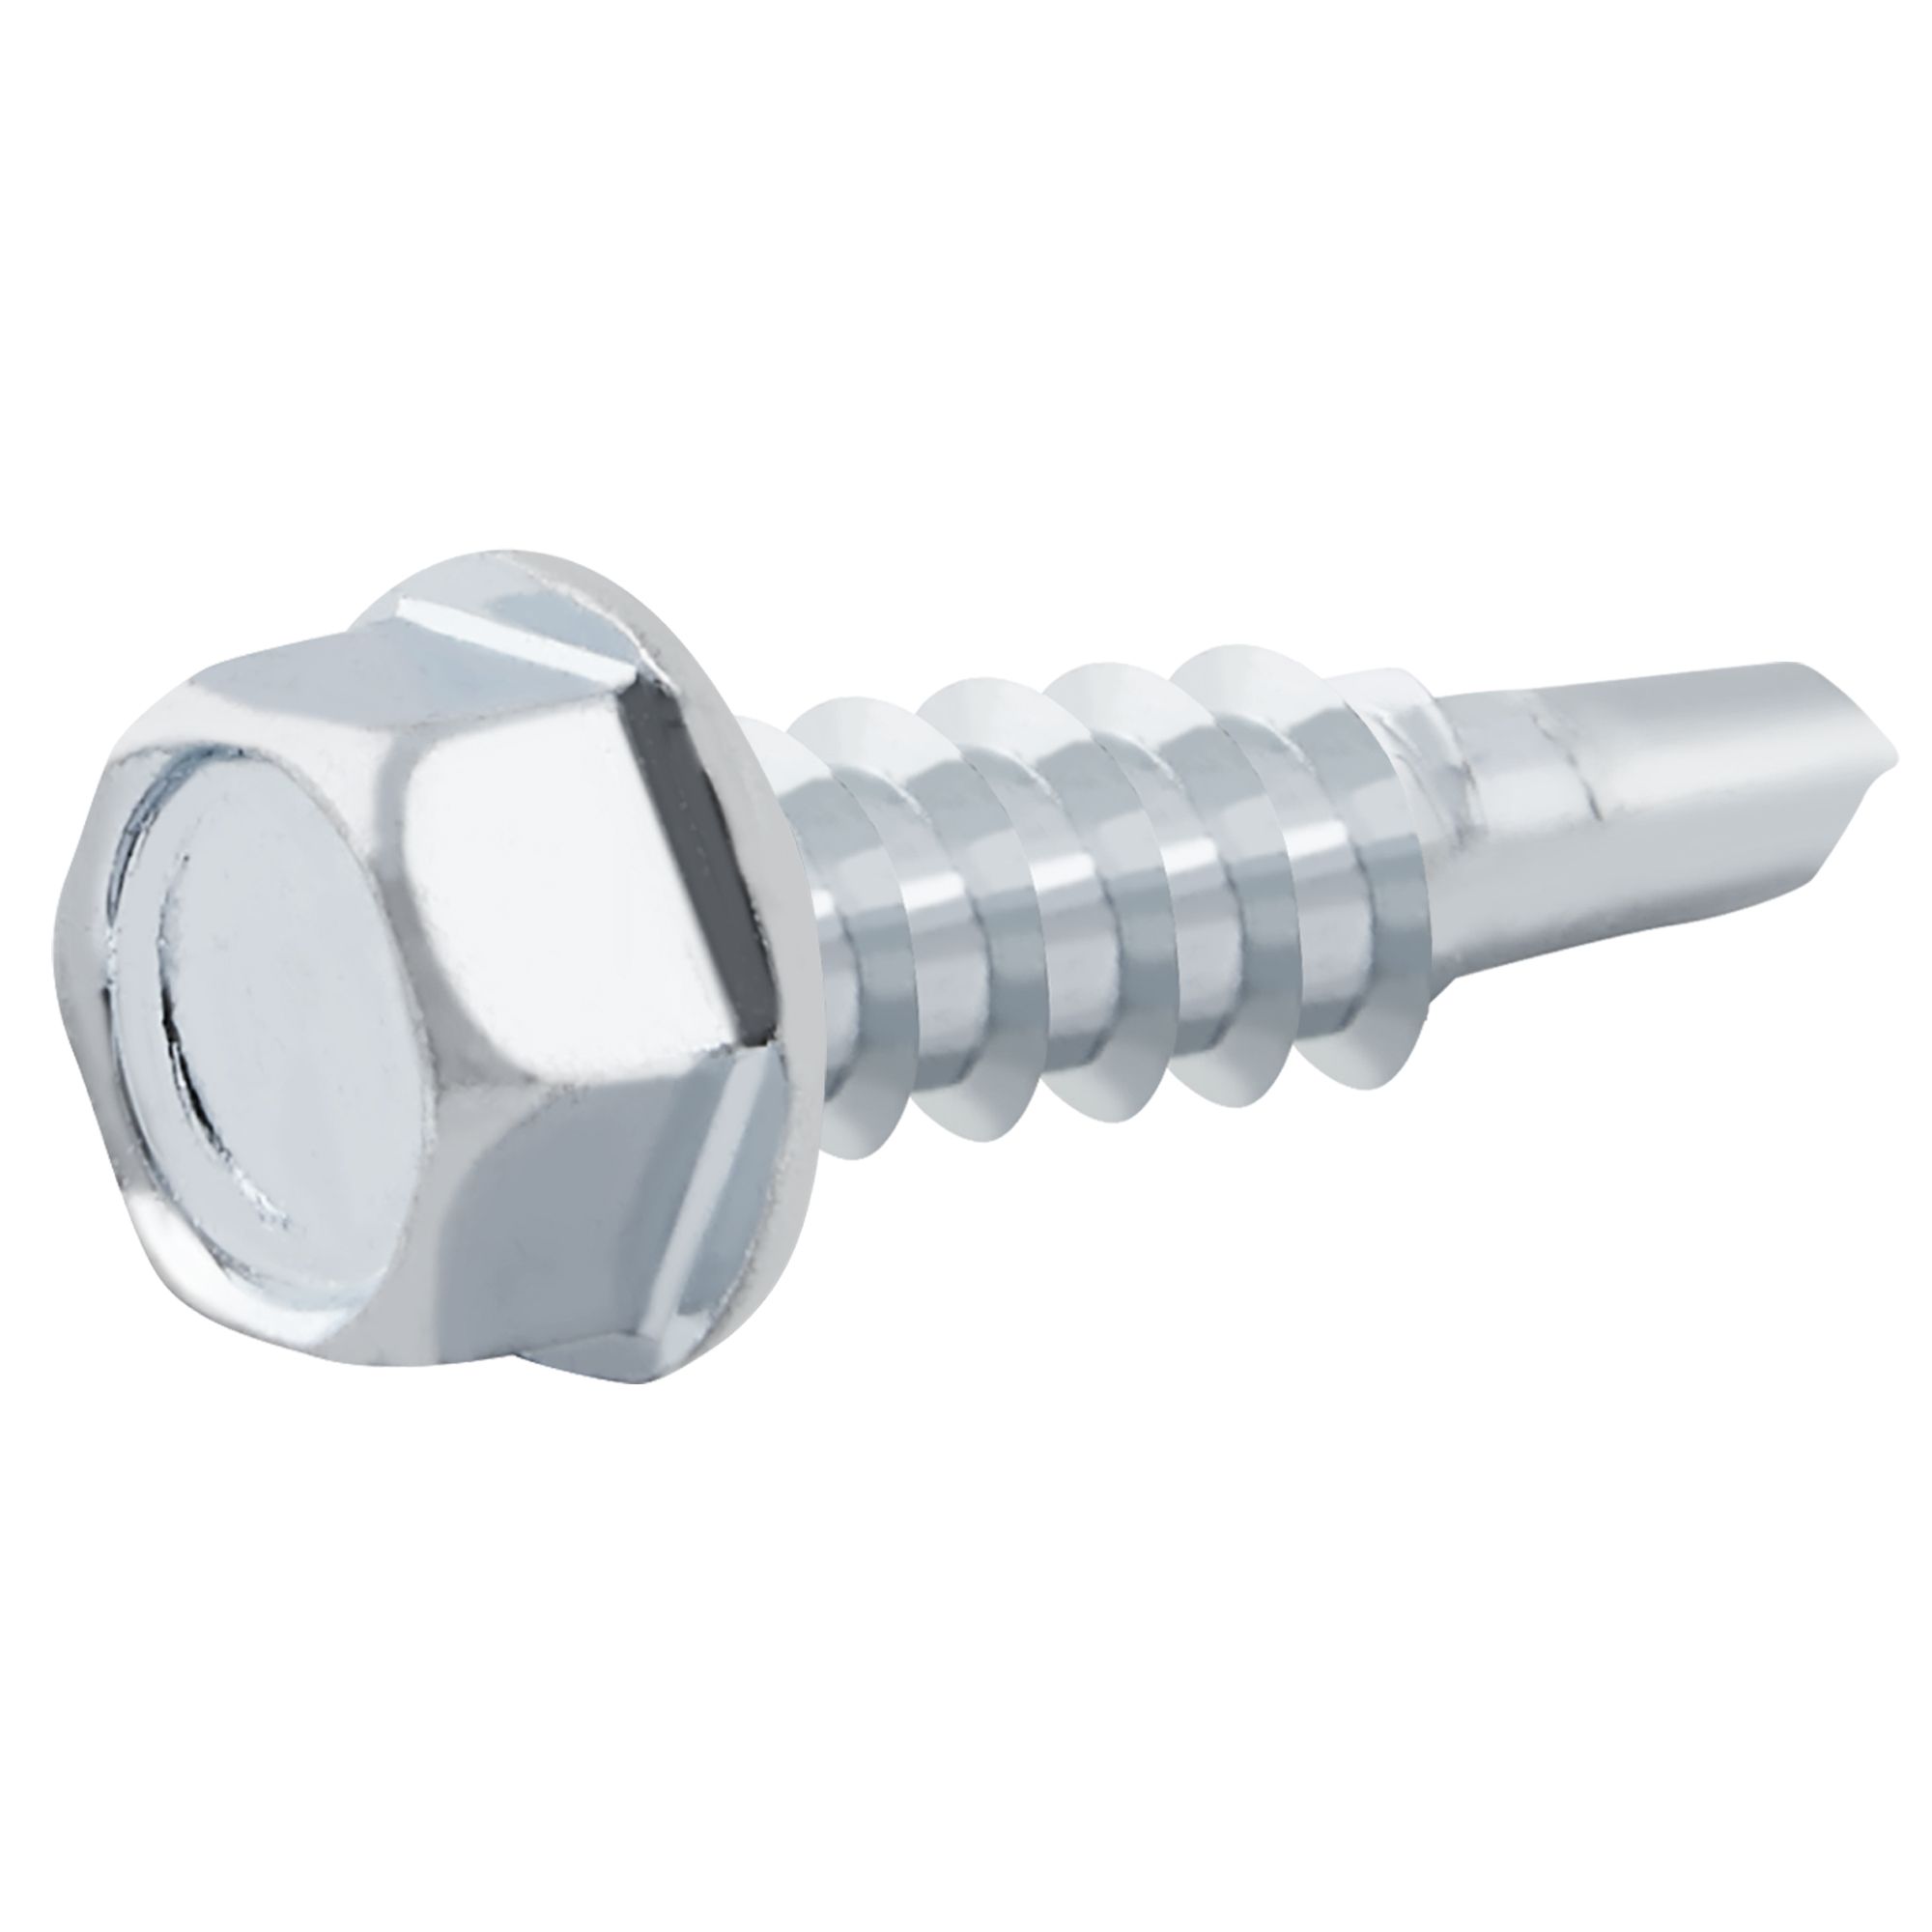 Diall Hex Zinc-plated Carbon steel Screw (Dia)4.8mm (L)19mm, Pack of 100